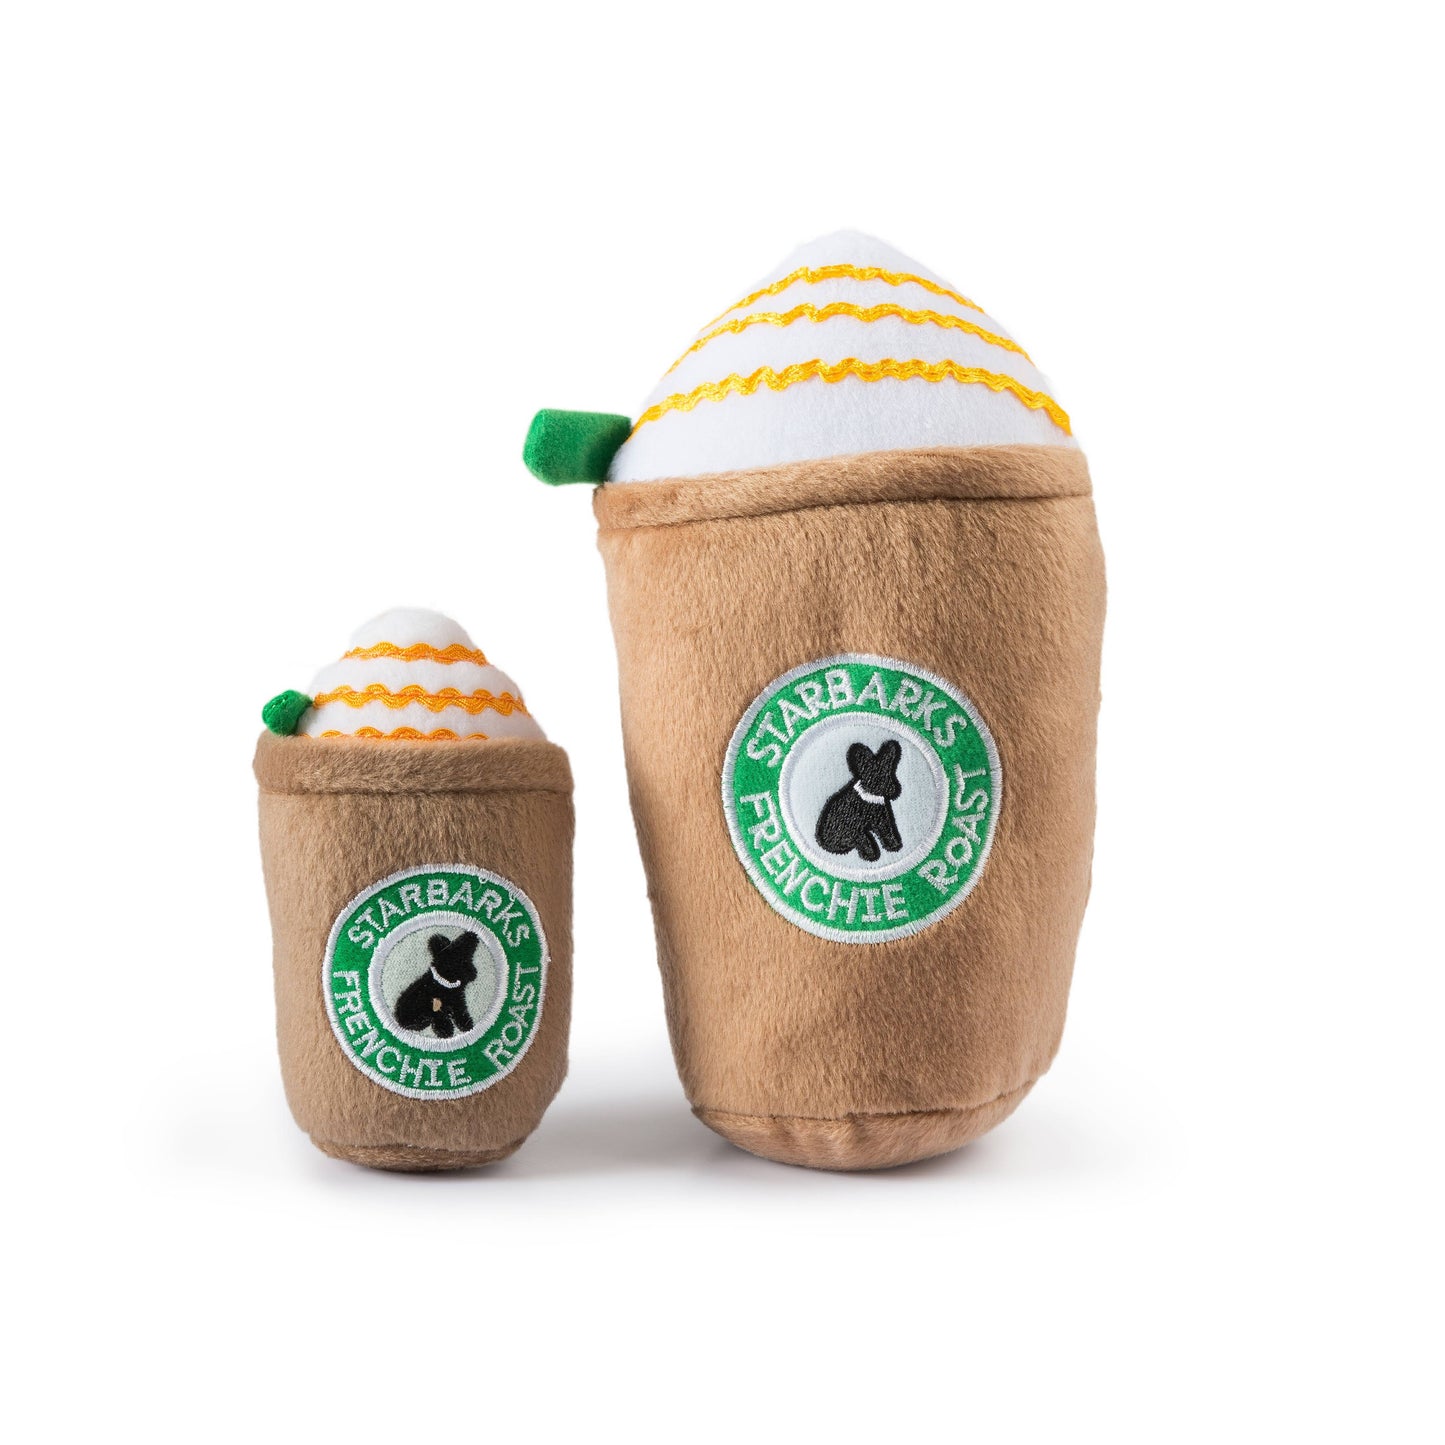 Load image into Gallery viewer, Haute Diggity Dog - Starbarks Frenchie Roast W/ Straw Squeaker Dog Toy: Small / Mini  Image
